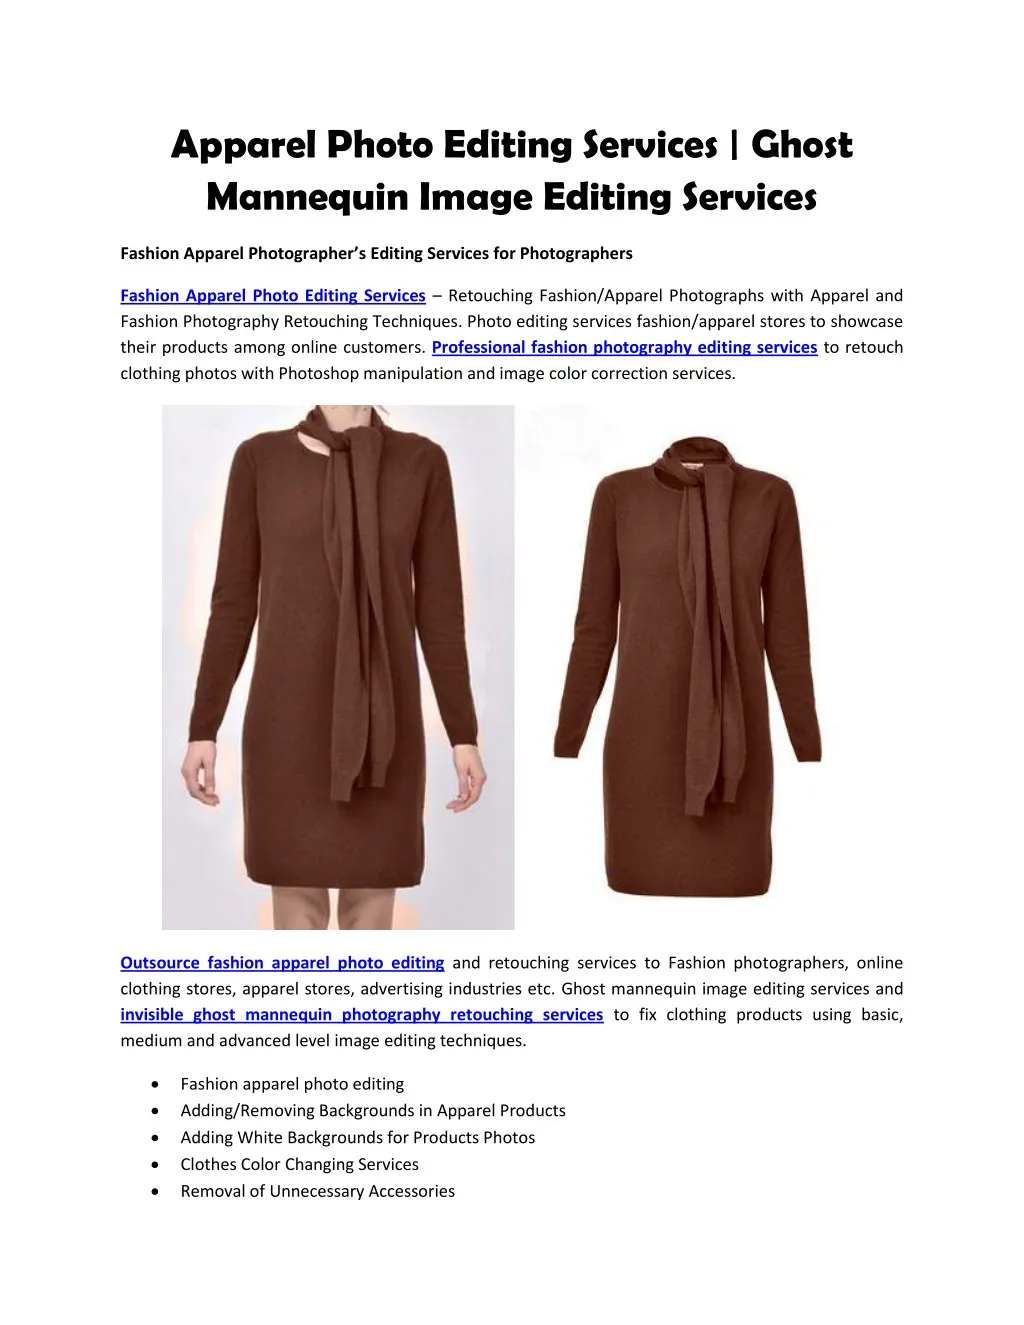 apparel photo editing services ghost mannequin